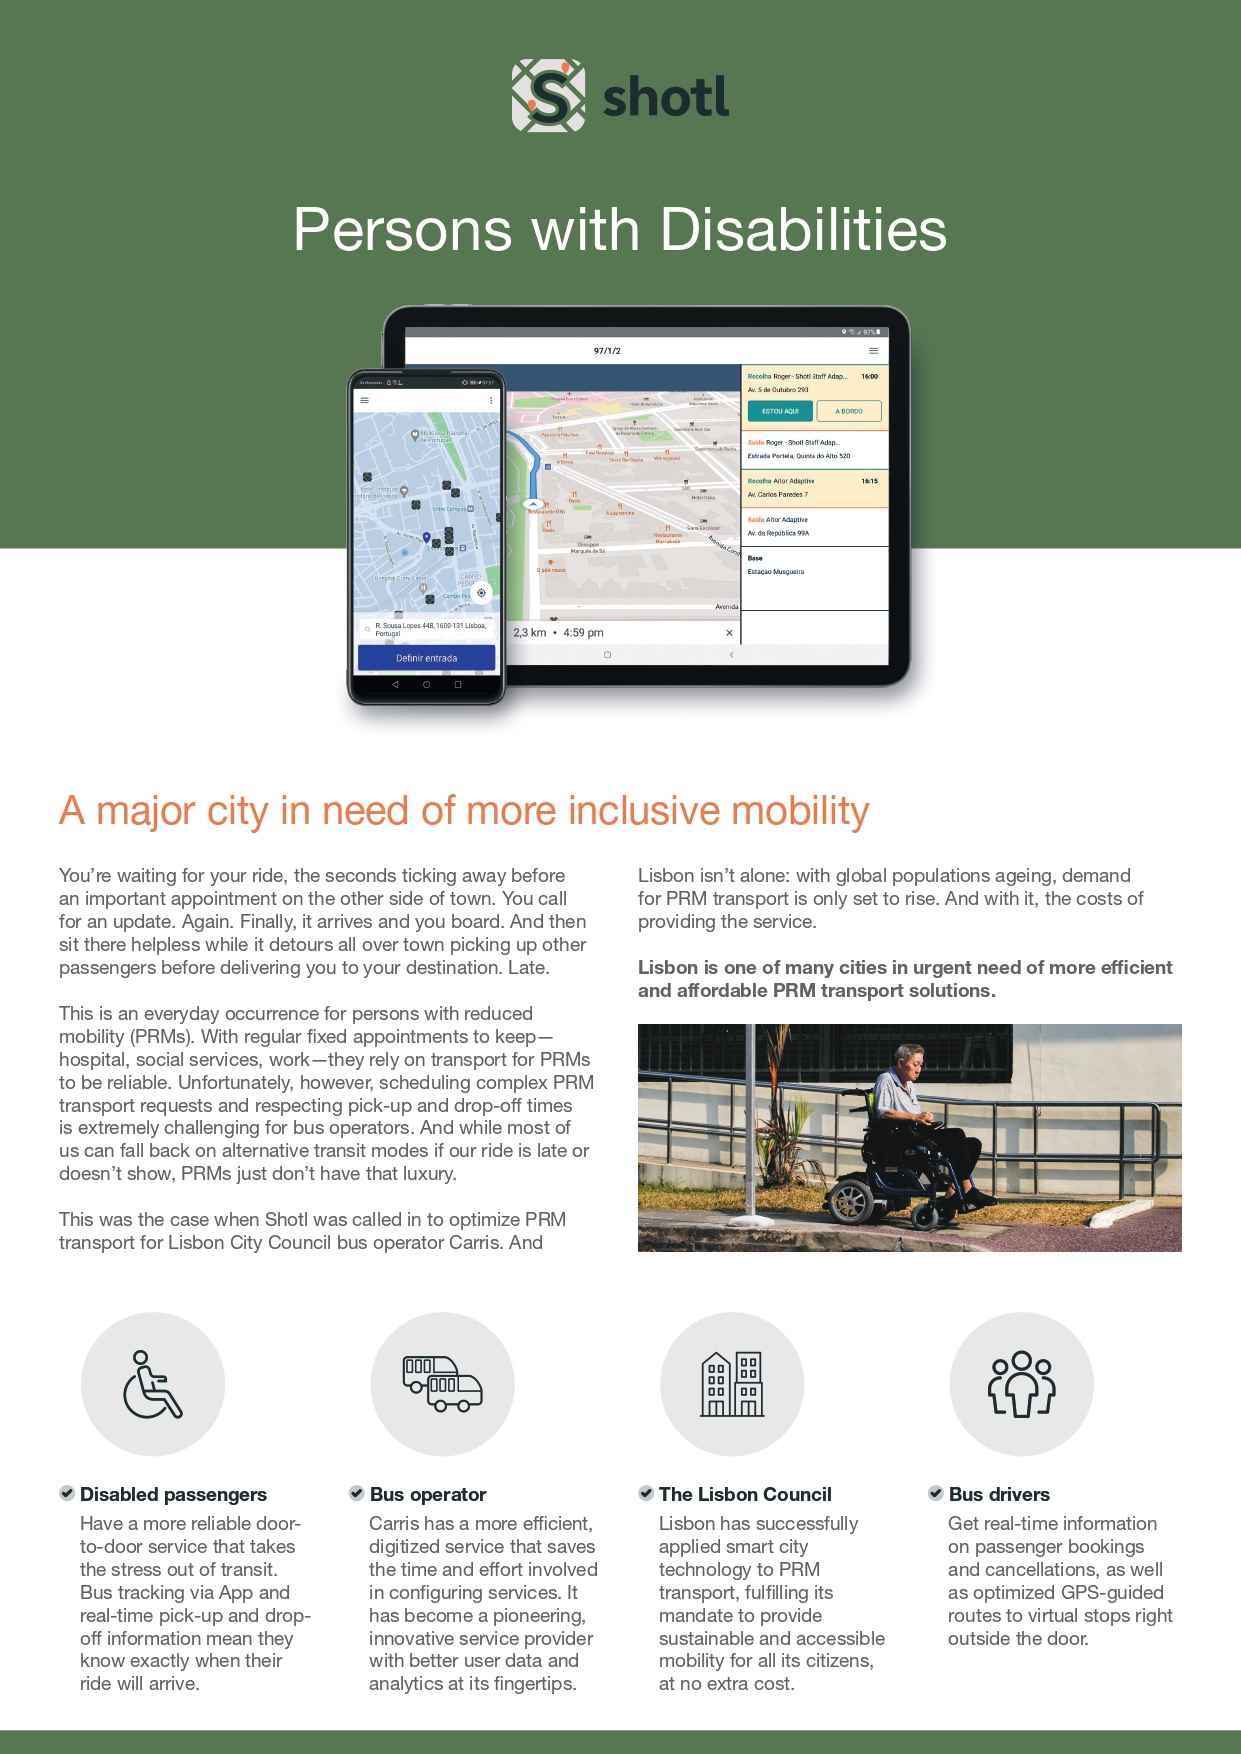 Providing On-Demand Mobility Services for Persons with Reduced Mobility (PRMs)